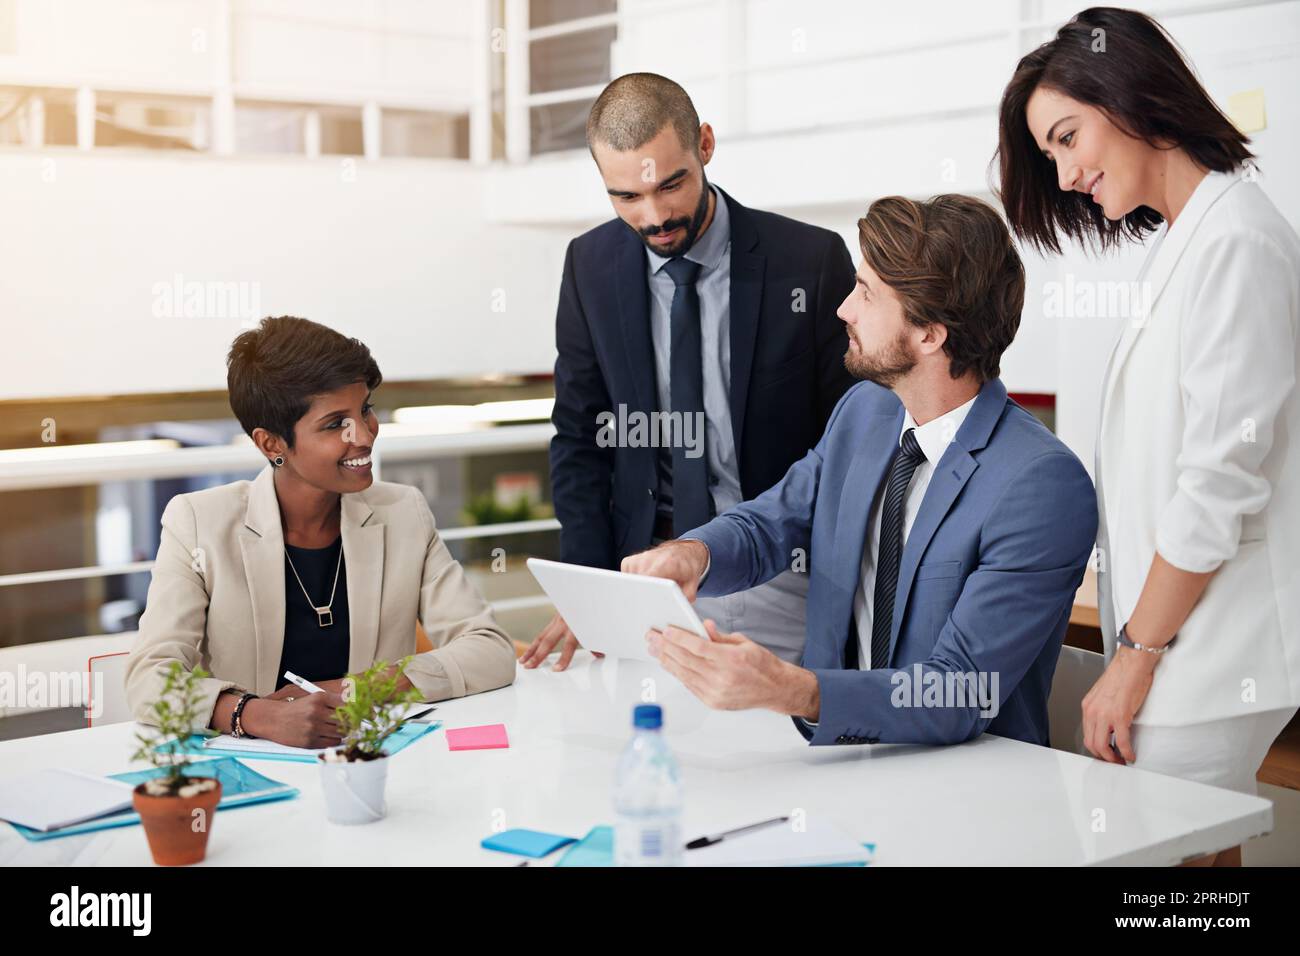 Combining their efforts together. businesspeople using a digital tablet in an office meeting. Stock Photo